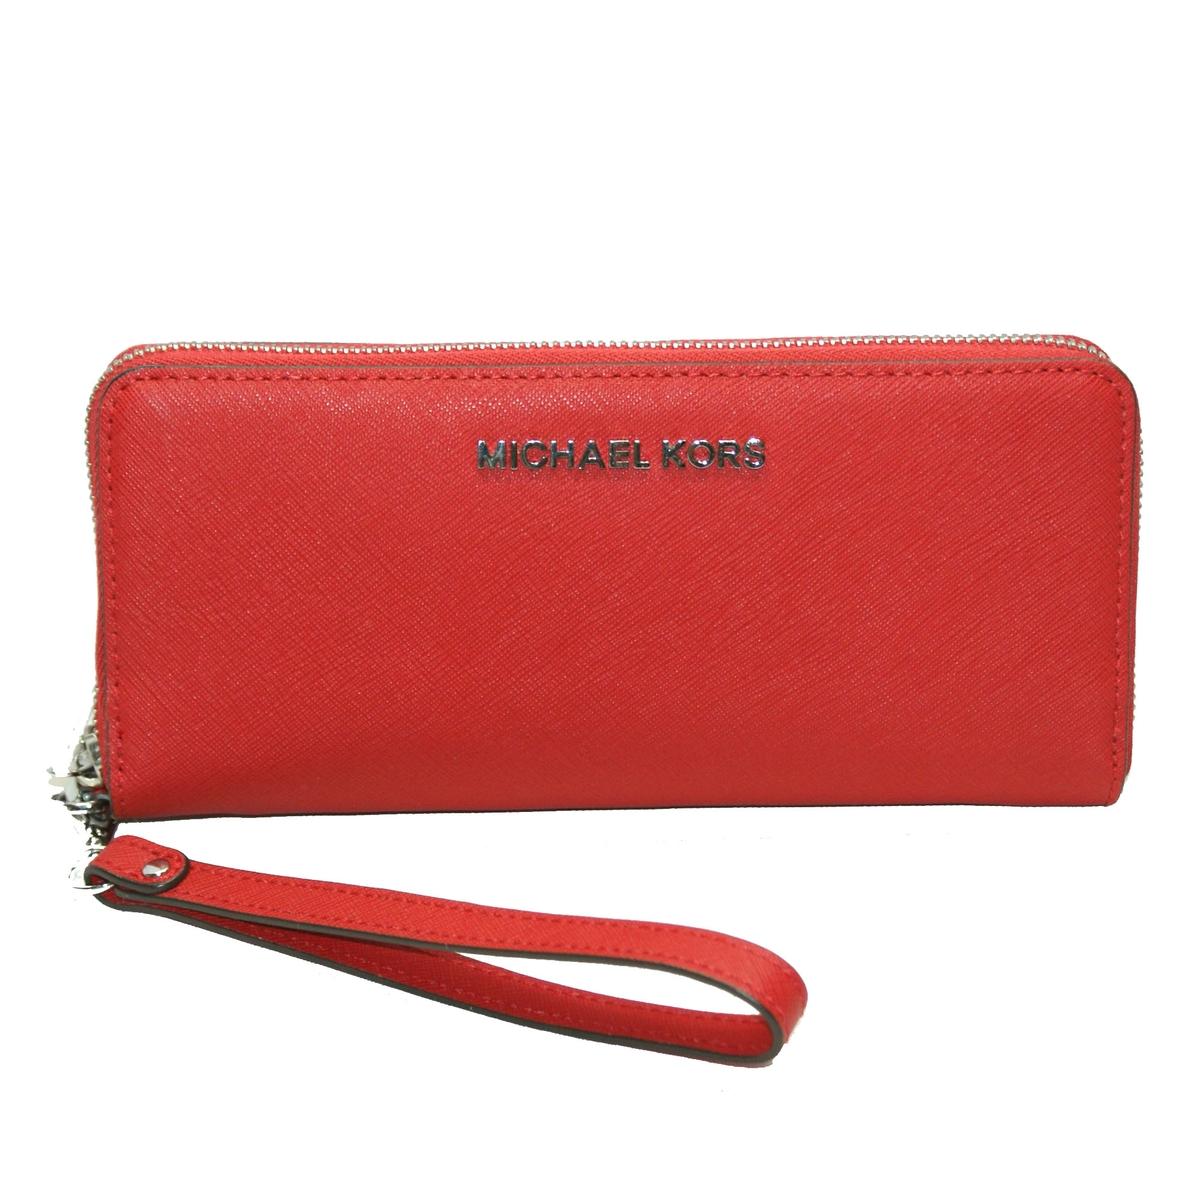 MICHAEL KORS LADY JET SET LARGE TRAVEL CONTINENTAL LONG WALLET CLUTCH CHILI  RED